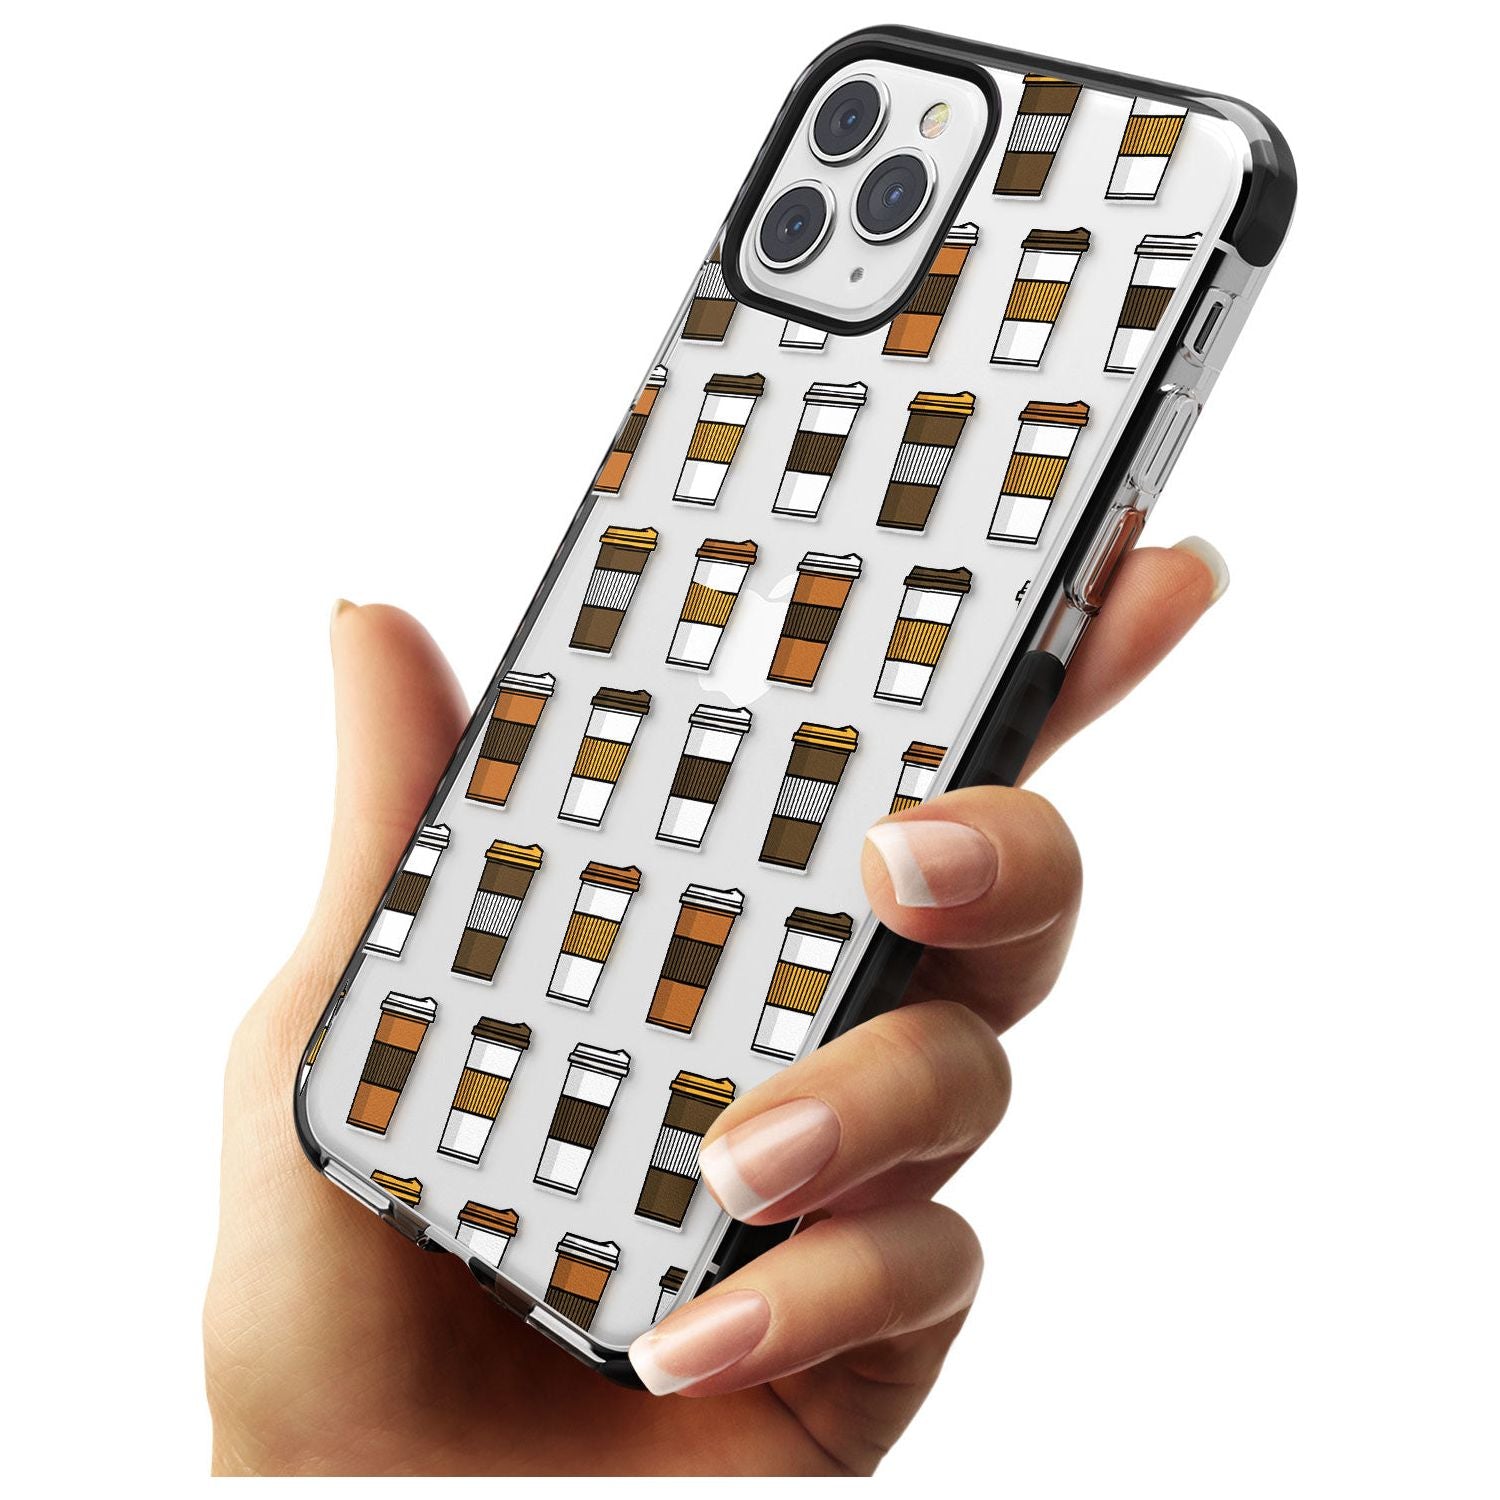 Coffee Cup Pattern Black Impact Phone Case for iPhone 11